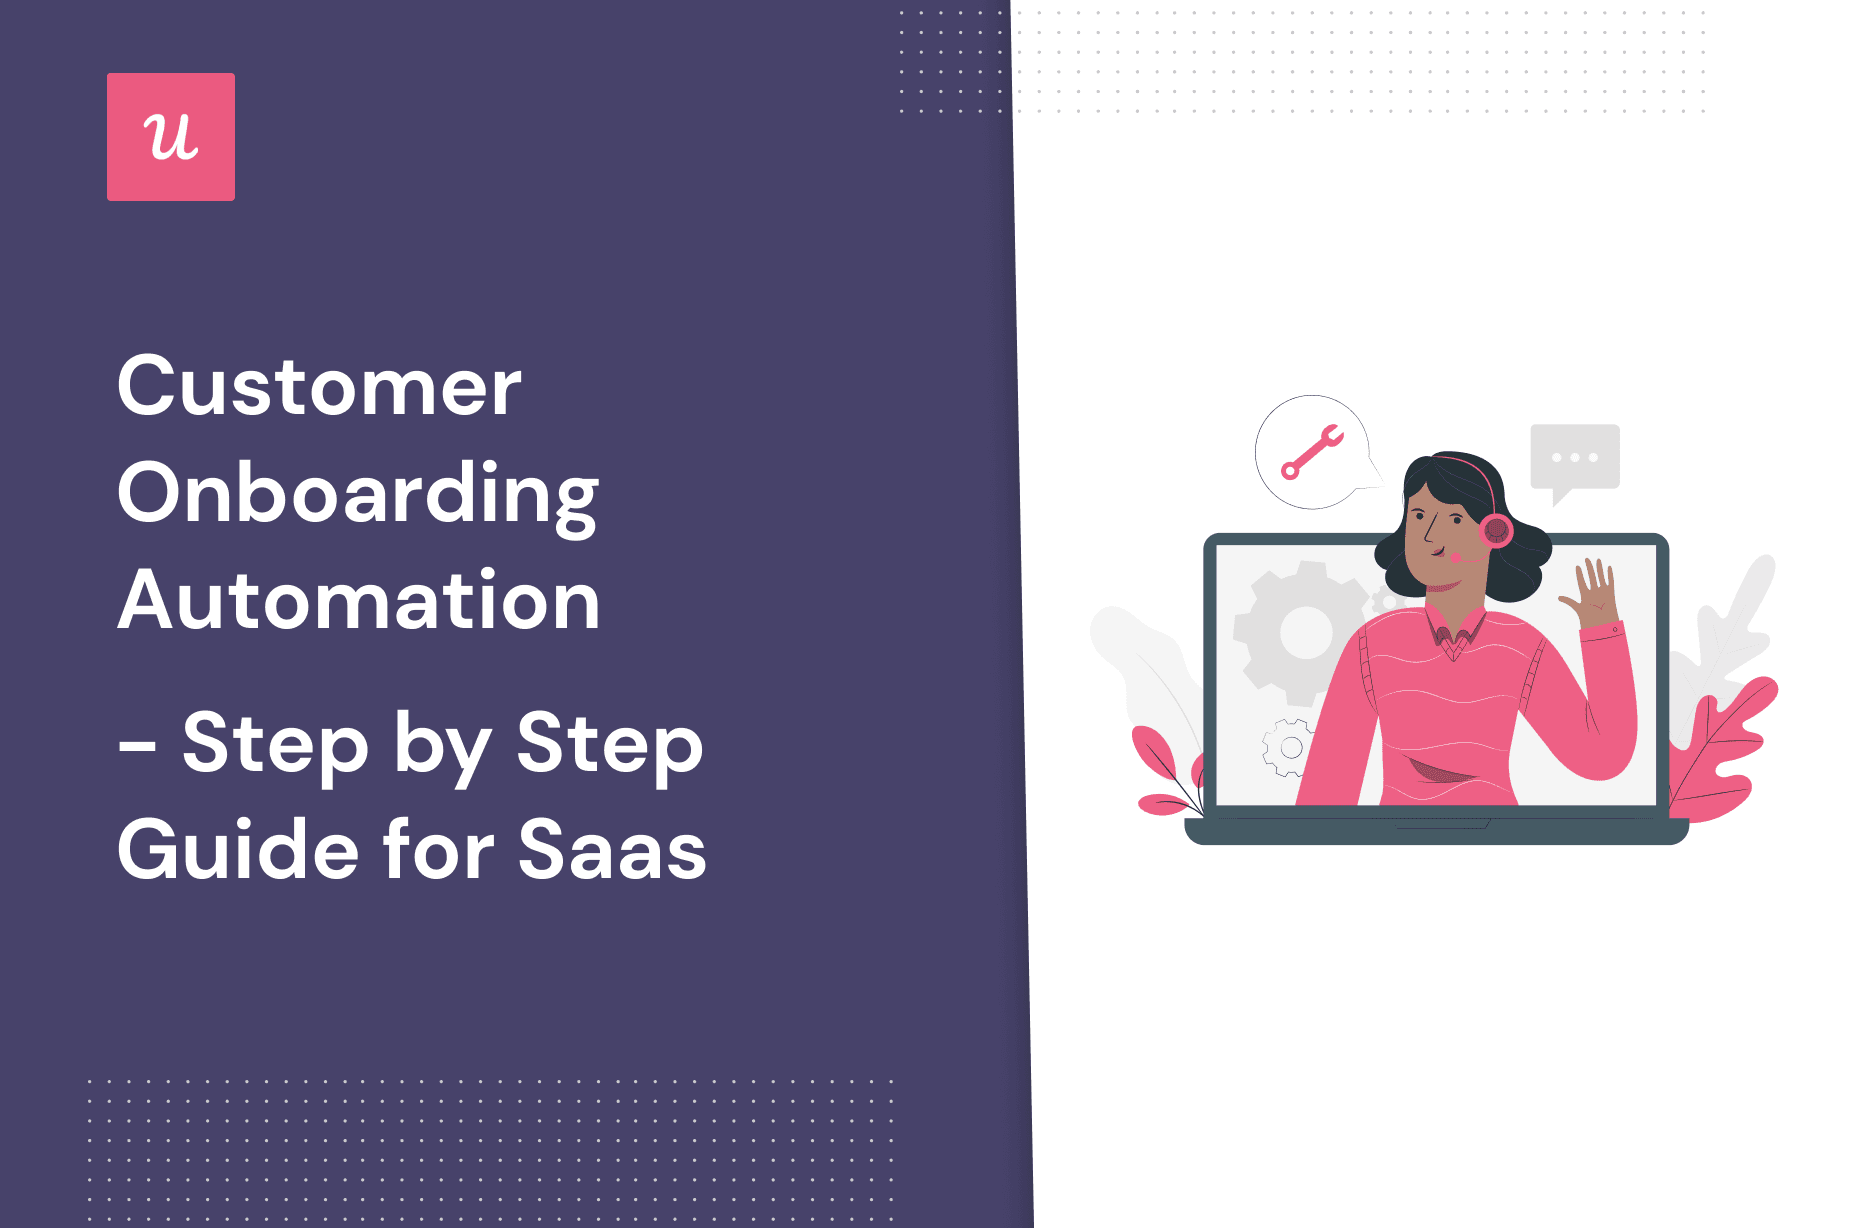 Customer Onboarding Automation - Step by Step Guide